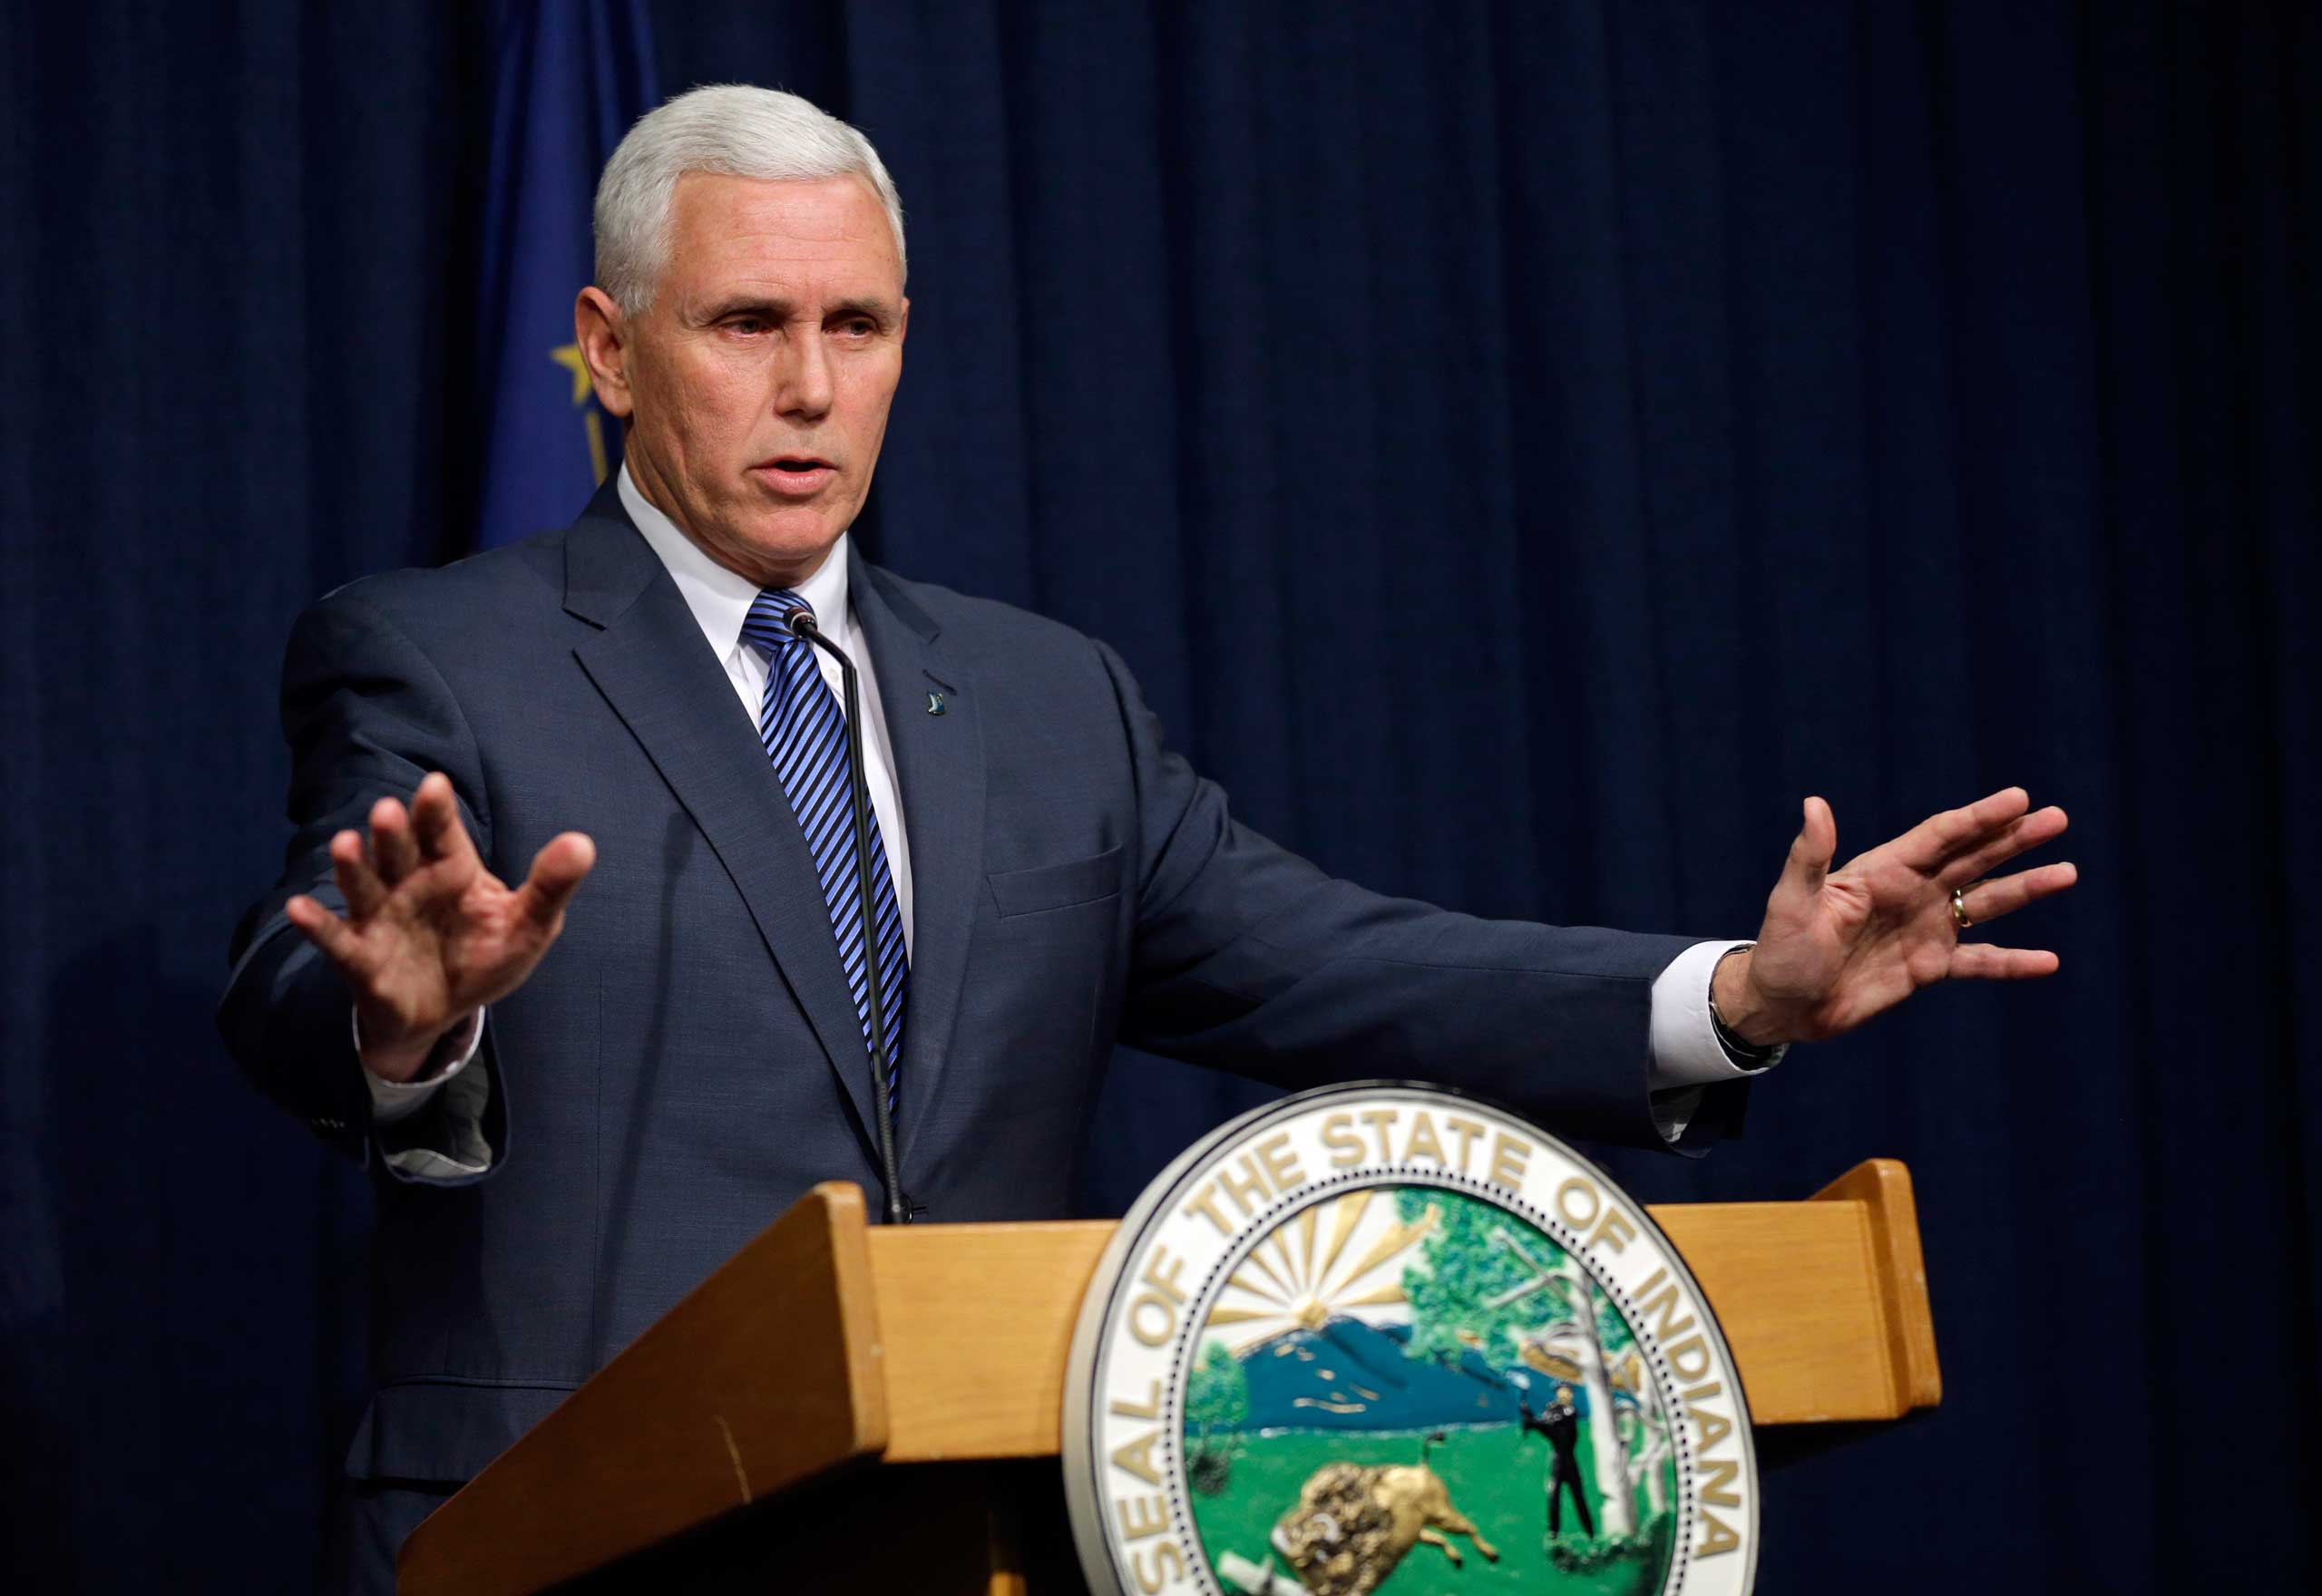 Indiana Gov. Mike Pence holds a news conference at the Statehouse in Indianapolis, Thursday, March 26, 2015. (Michael Conroy&mdash;AP)